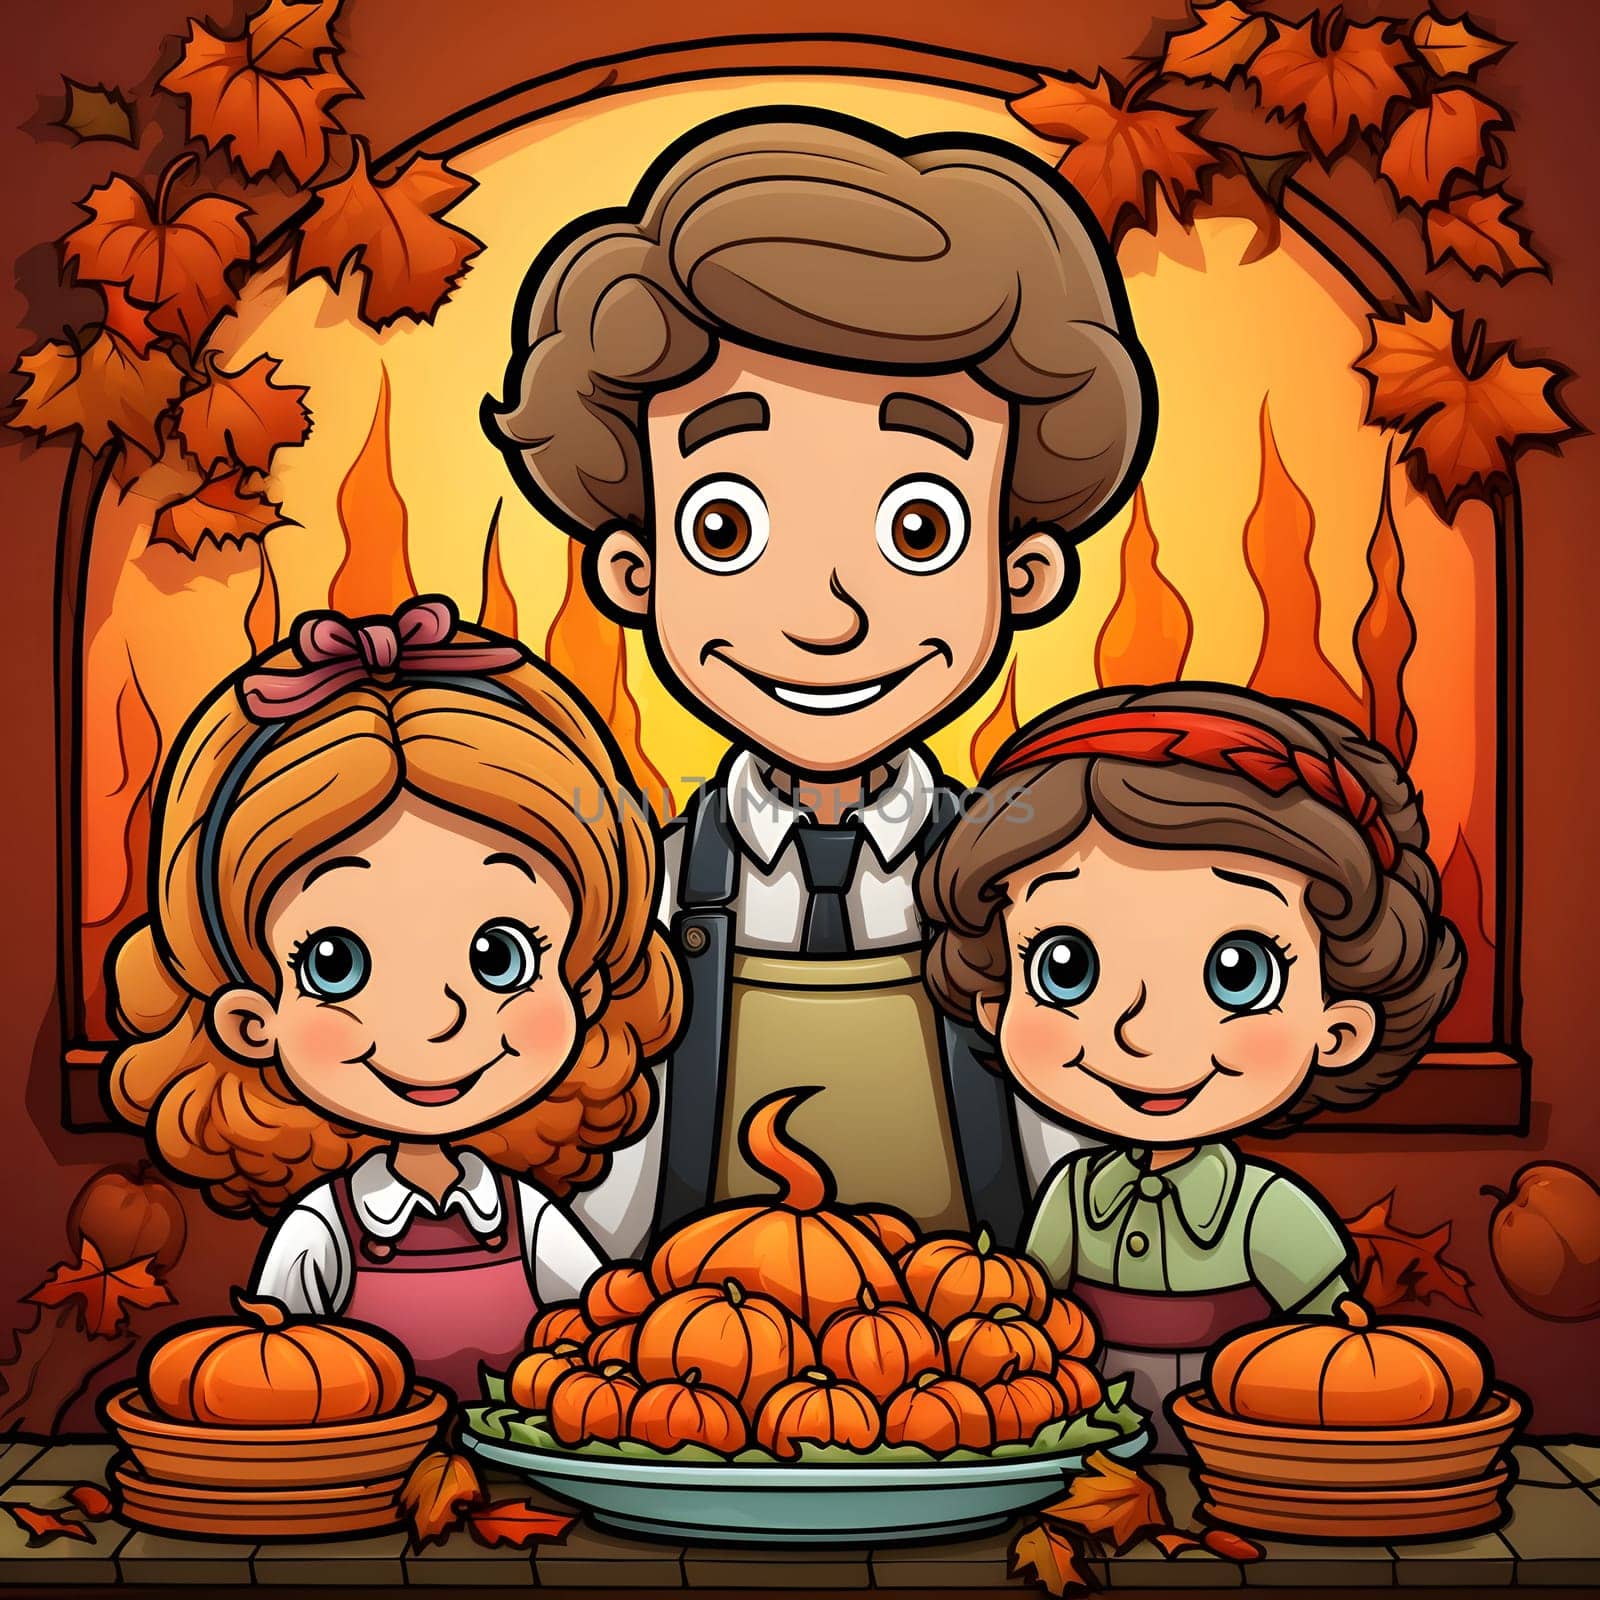 Illustration of a smiling family at a table with pumpkins in the back of the fireplace and leaves. Pumpkin as a dish of thanksgiving for the harvest. by ThemesS